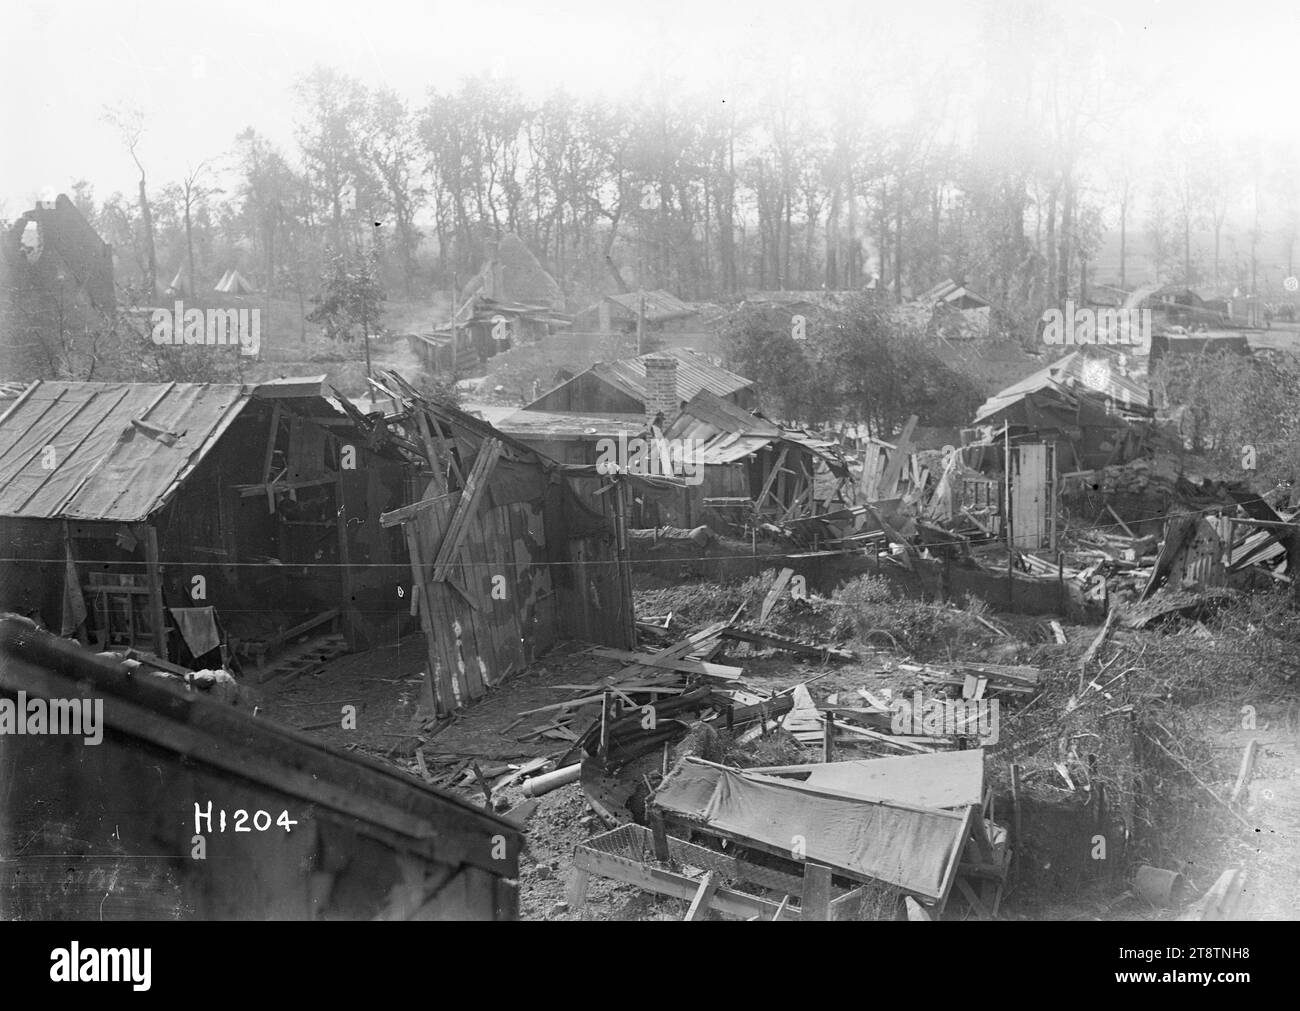 New Zealand Divisional Headquarters at Fremicourt, France, World War I, A general view over the New Zealand Divisional Headquarters at Fremicourt, France during World War I. Shows a number of houses, ramshackle huts and tents with trees in the background. There are many planks of timber and sheets of iron laying on the ground suggesting earlier shell damage, 7 September 1918 Stock Photo